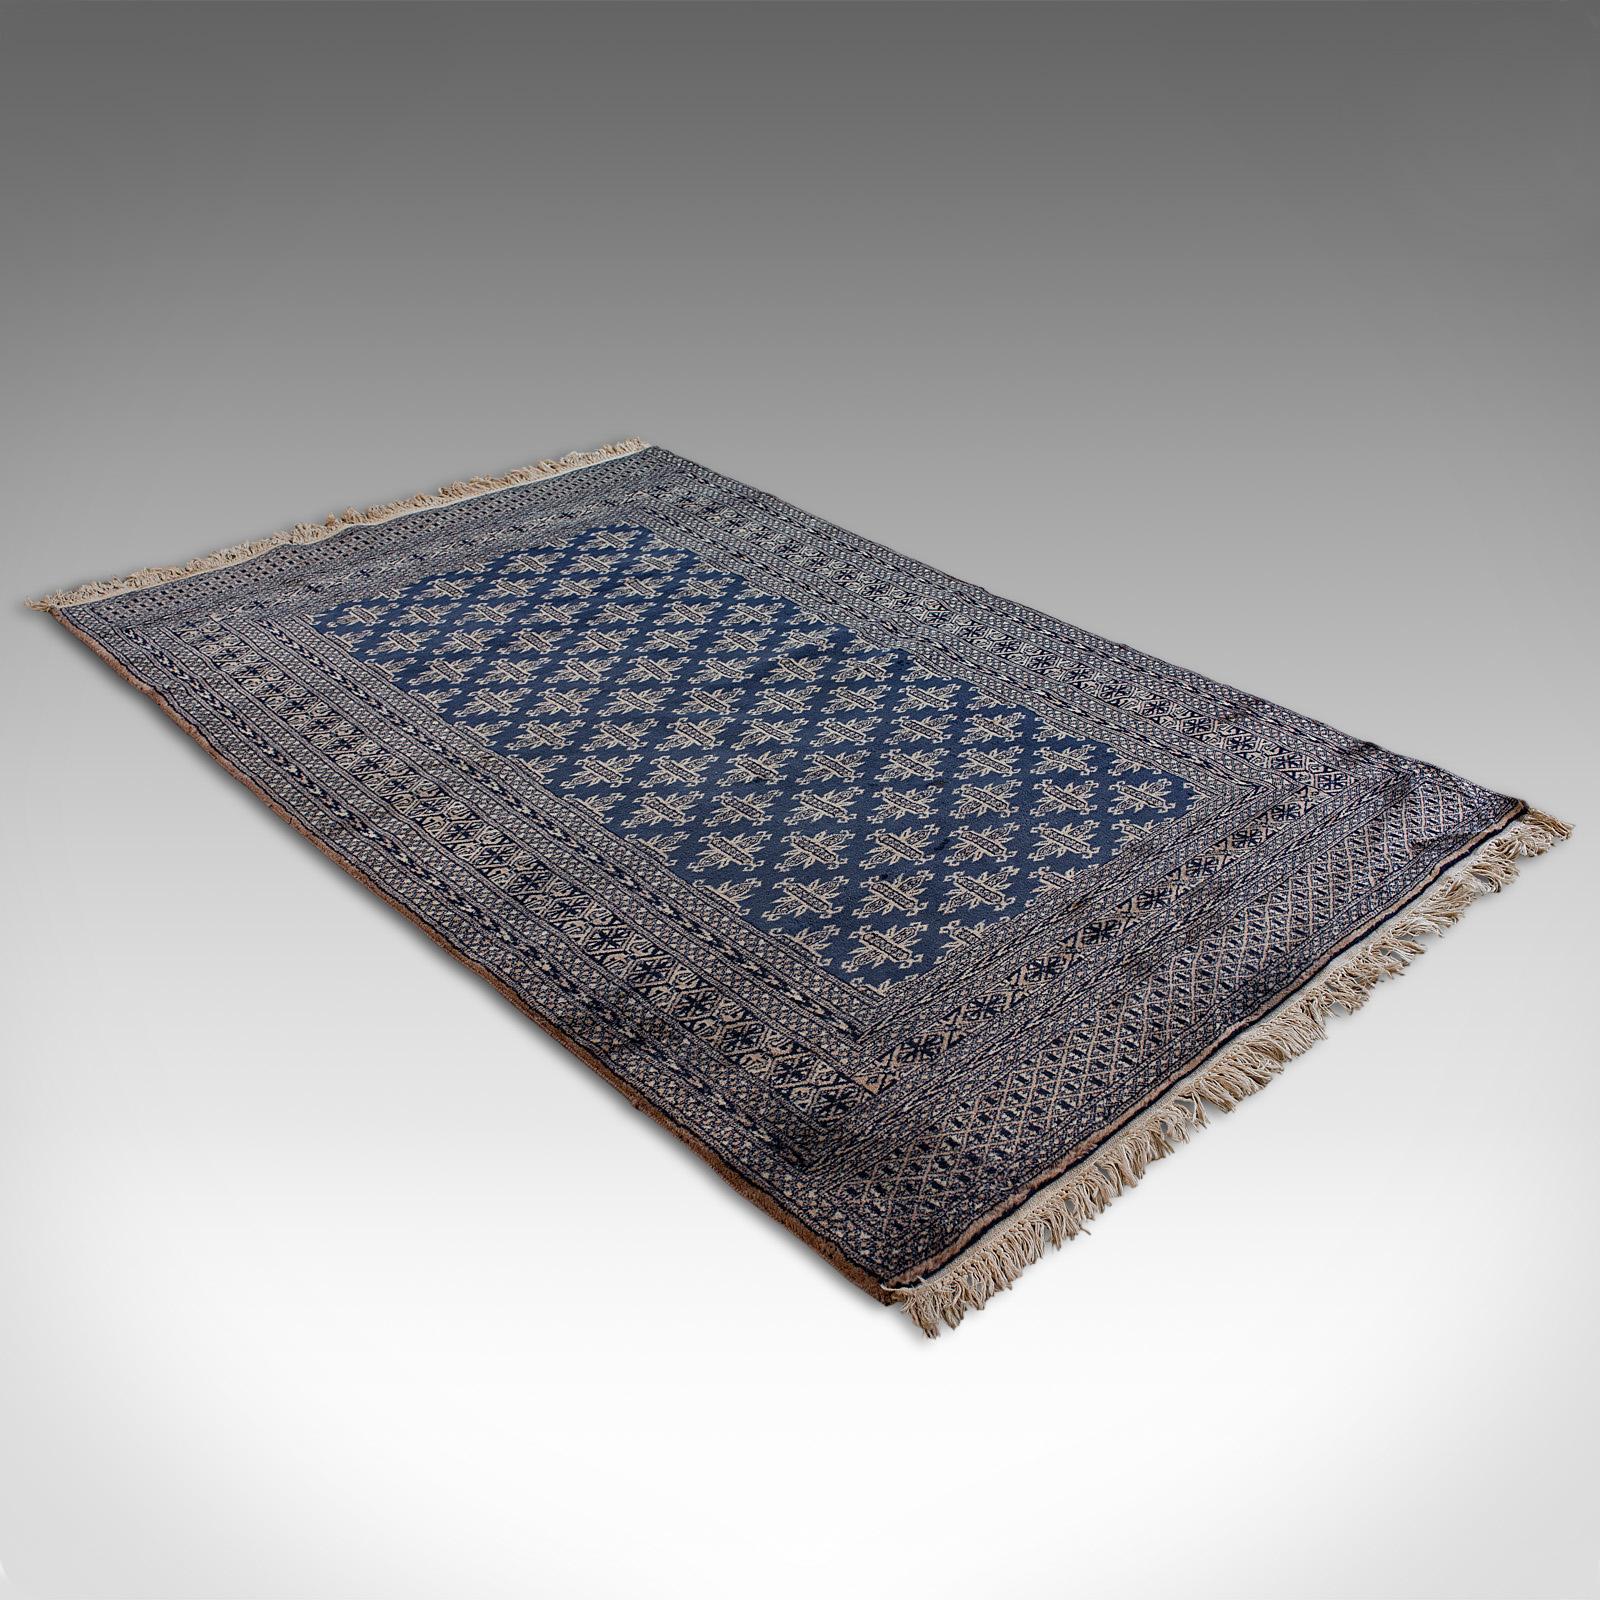 Wool Vintage Bokhara Rug, Persian, Woven, Hall Carpet, Early 20th Century, circa 1930 For Sale